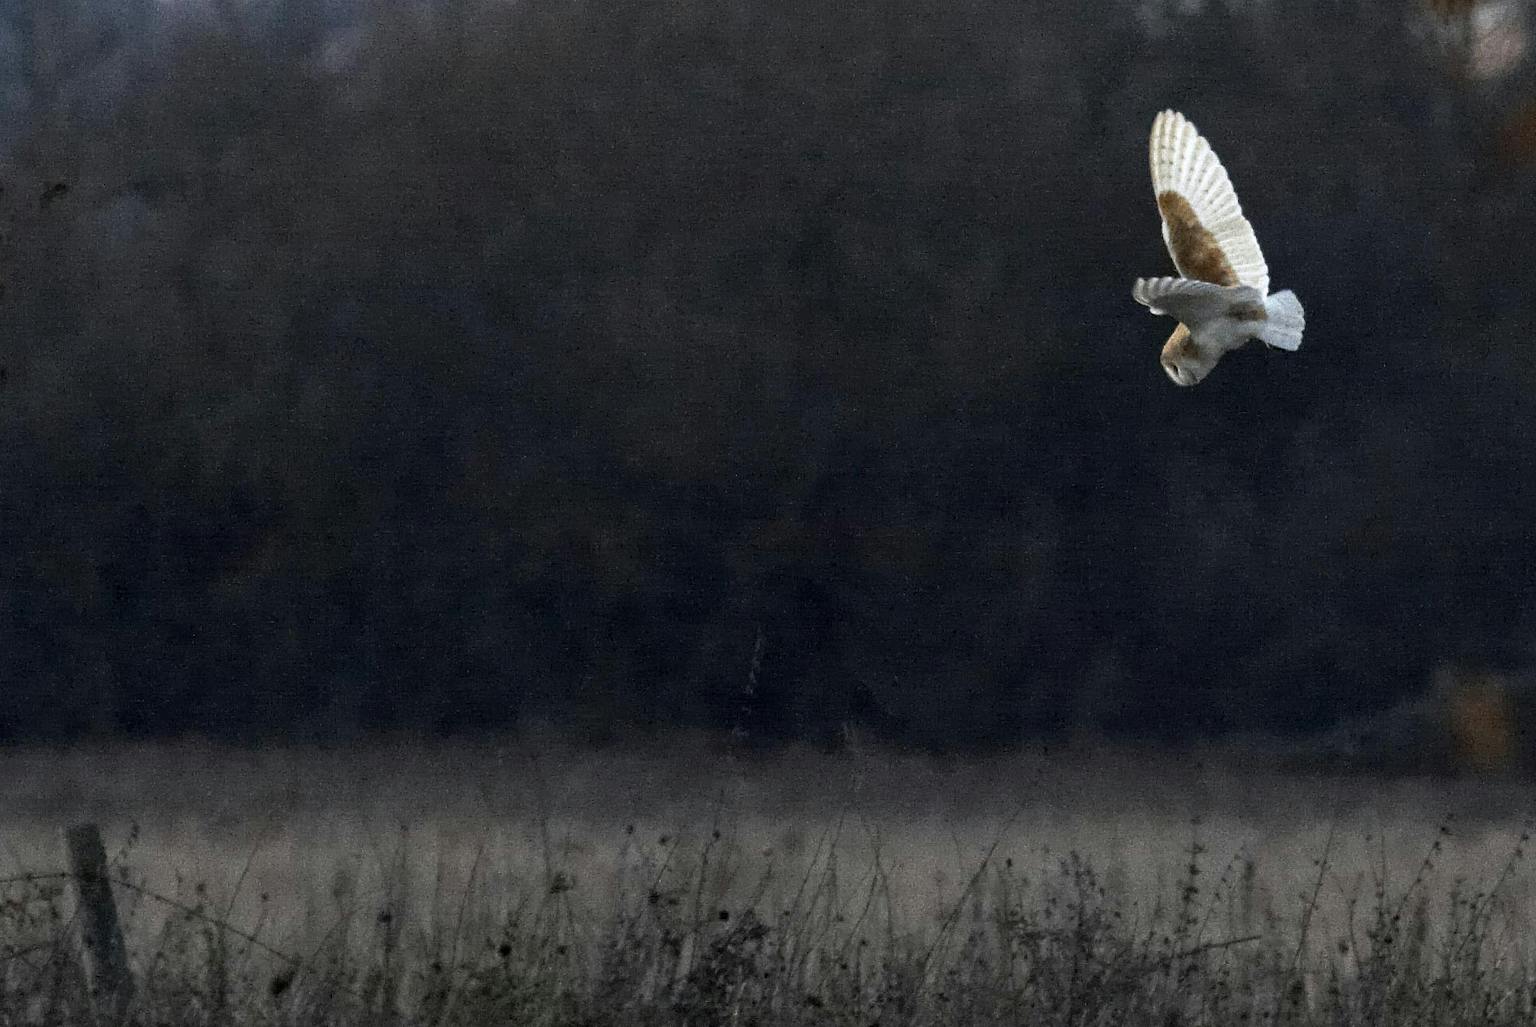 Barn owl flying over a field